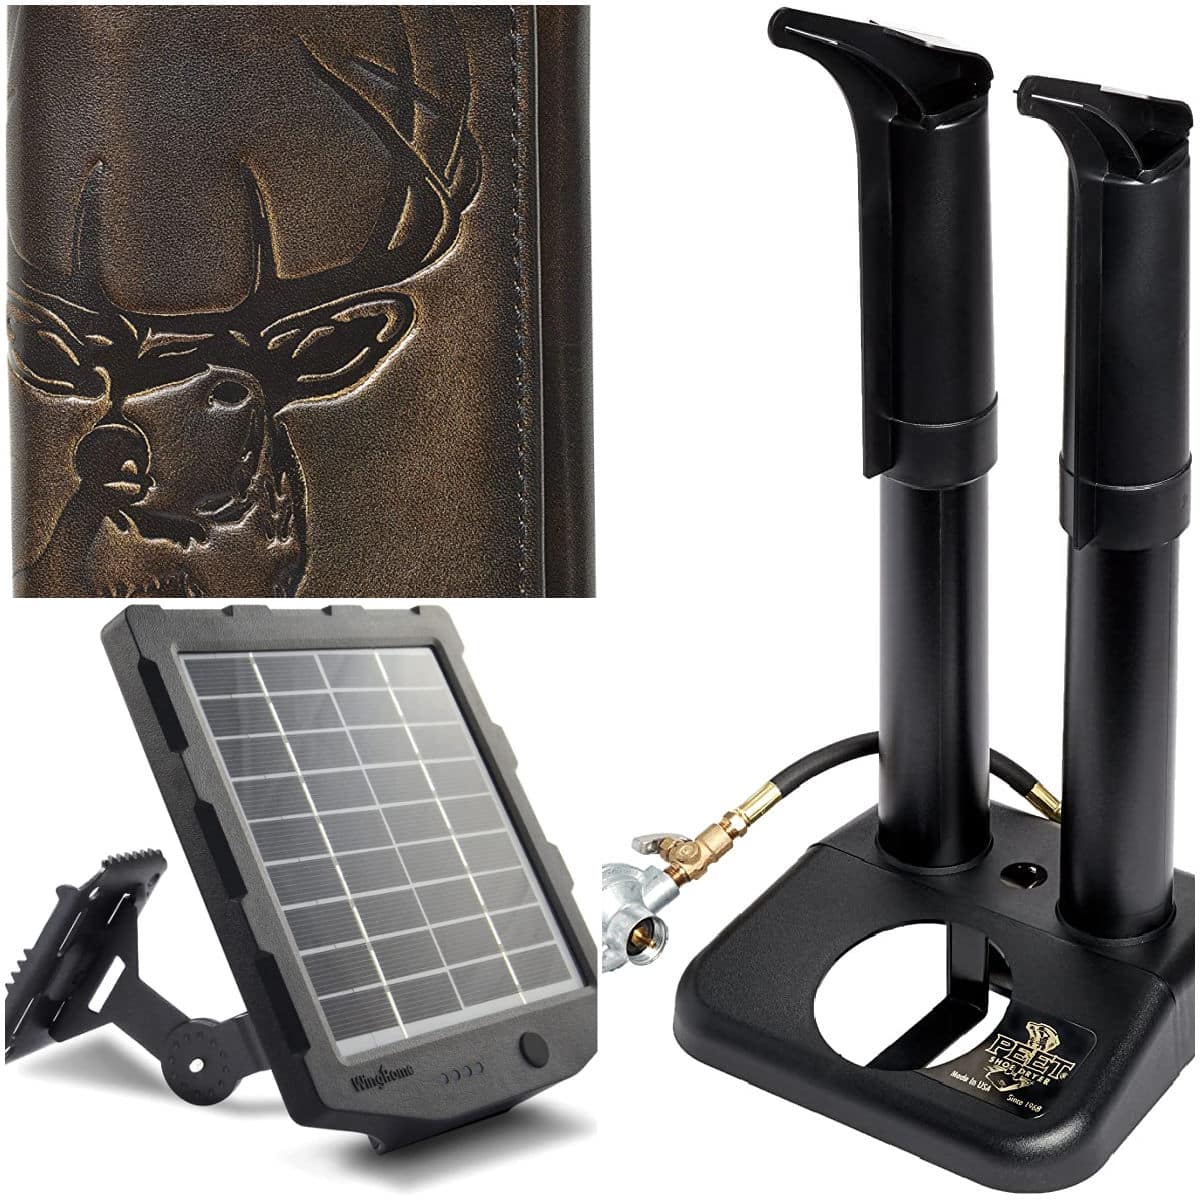 A collage of images of the perfect christmas gifts for deer hunters.